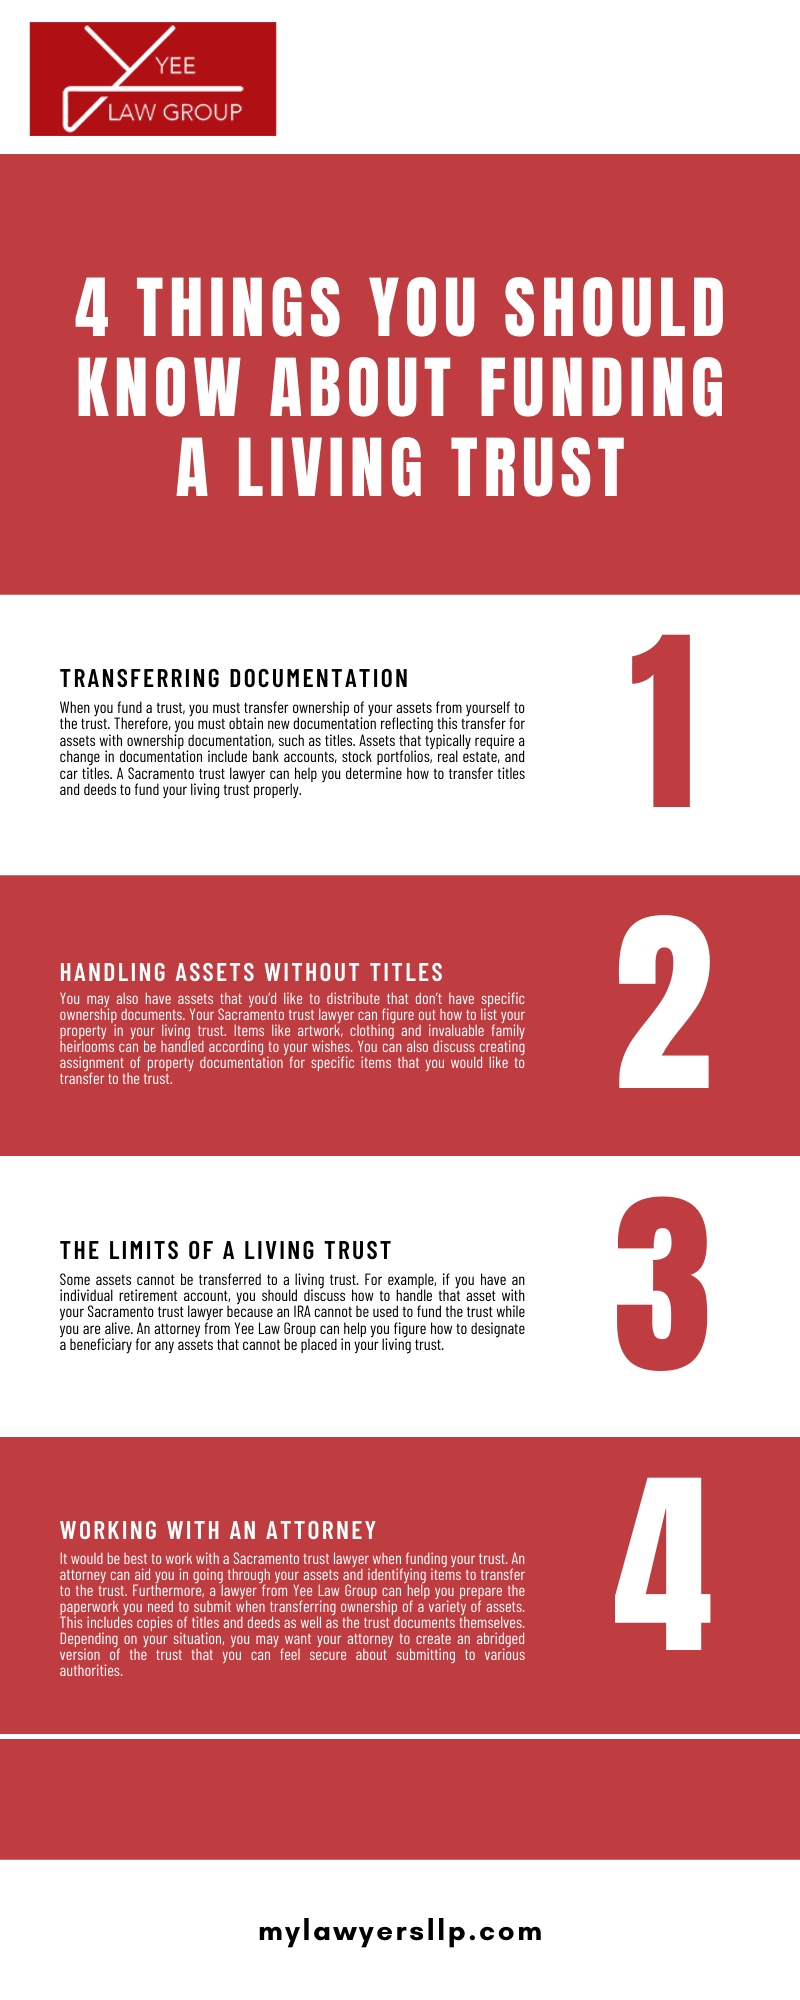 4 THINGS YOU SHOULD KNOW ABOUT FUNDING A LIVING TRUST INFOGRAPHIC